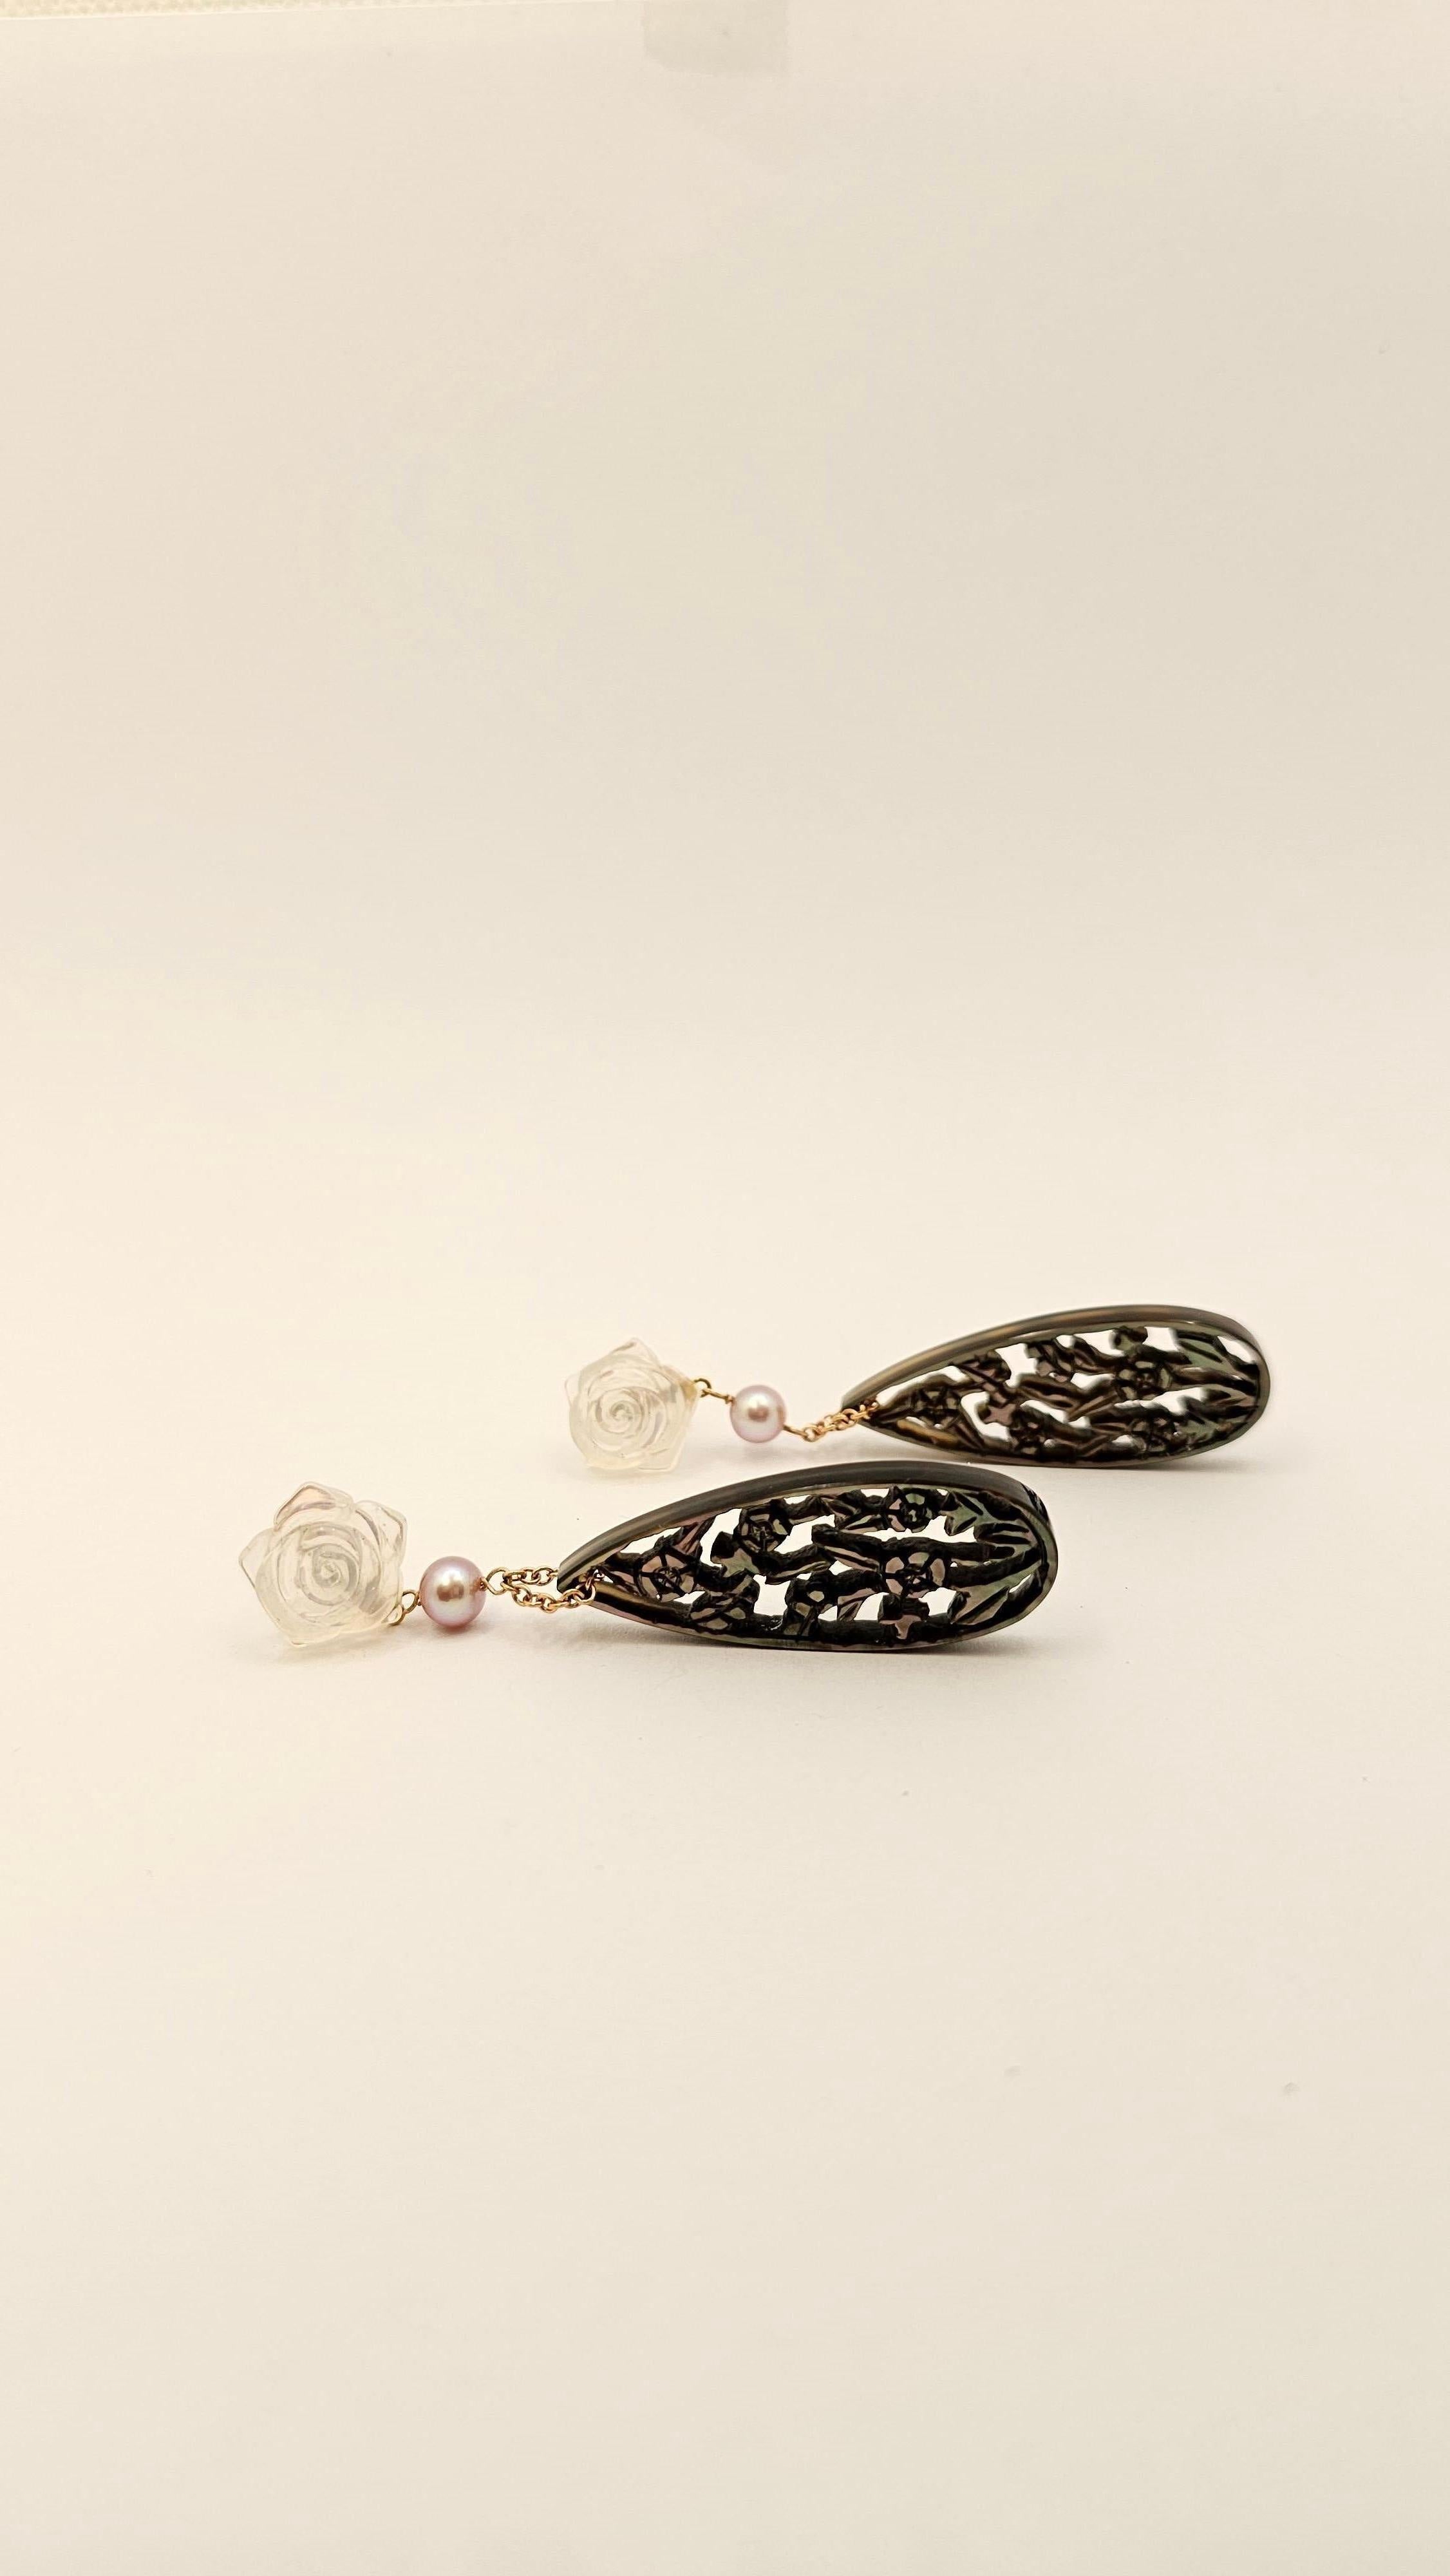 A pair of pendant earrings made of 18 kt rose gold.
Featuring two hand-pierced dark gray mother-of-pearl drops and floral design measuring mm 40 x 15.
The part of the upper is composed of two rose-shaped engraved Crystals with a diameter of about